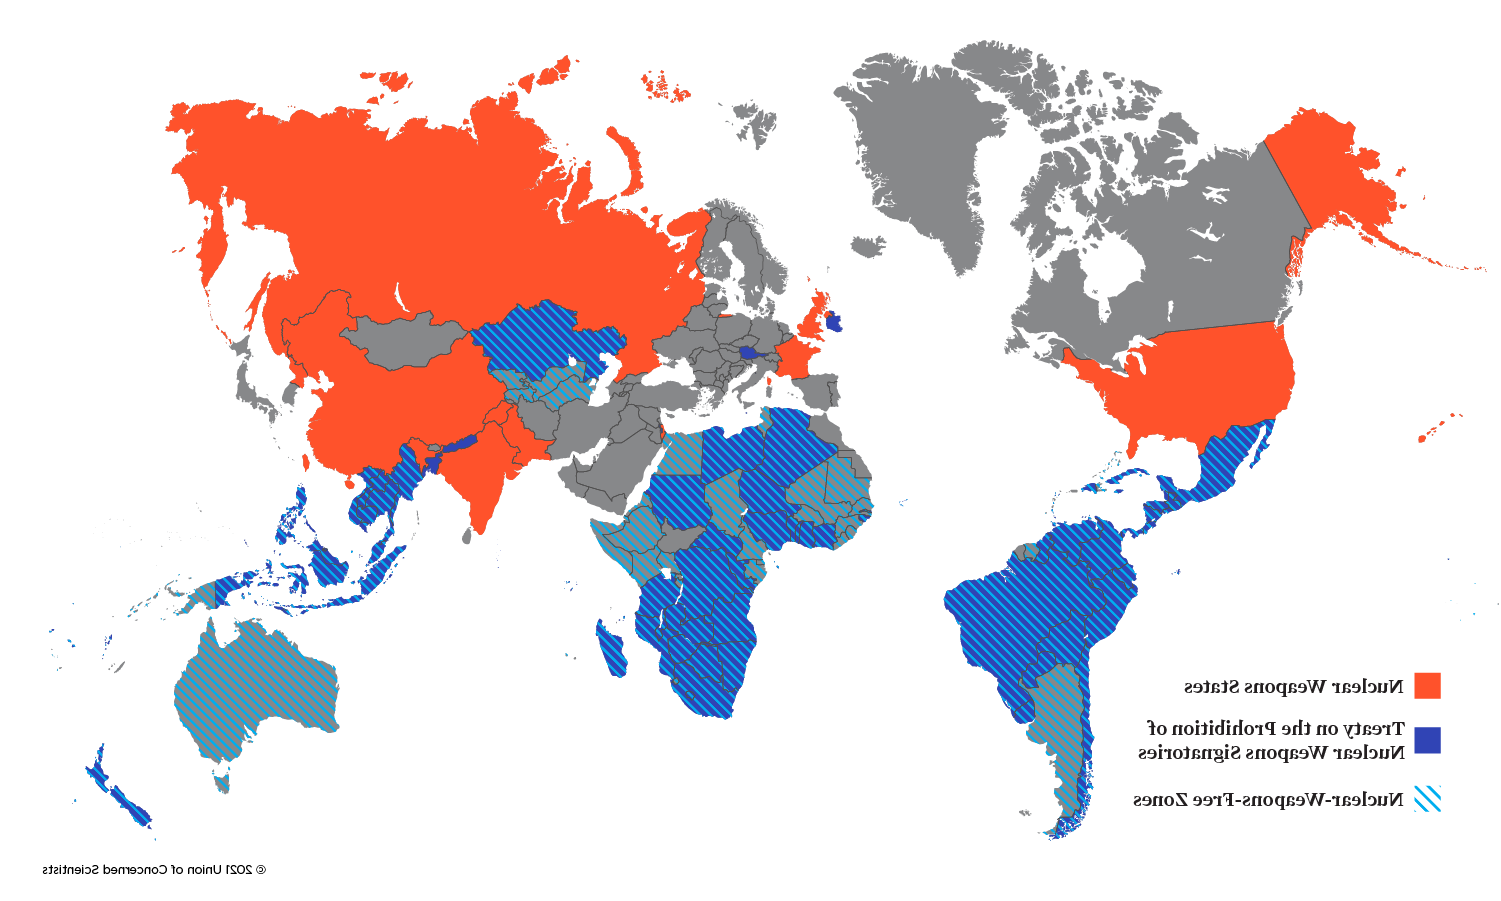 World map showing nuclear weapons states, TPNW签署国, and countries that are nuclear-weapons-free zones